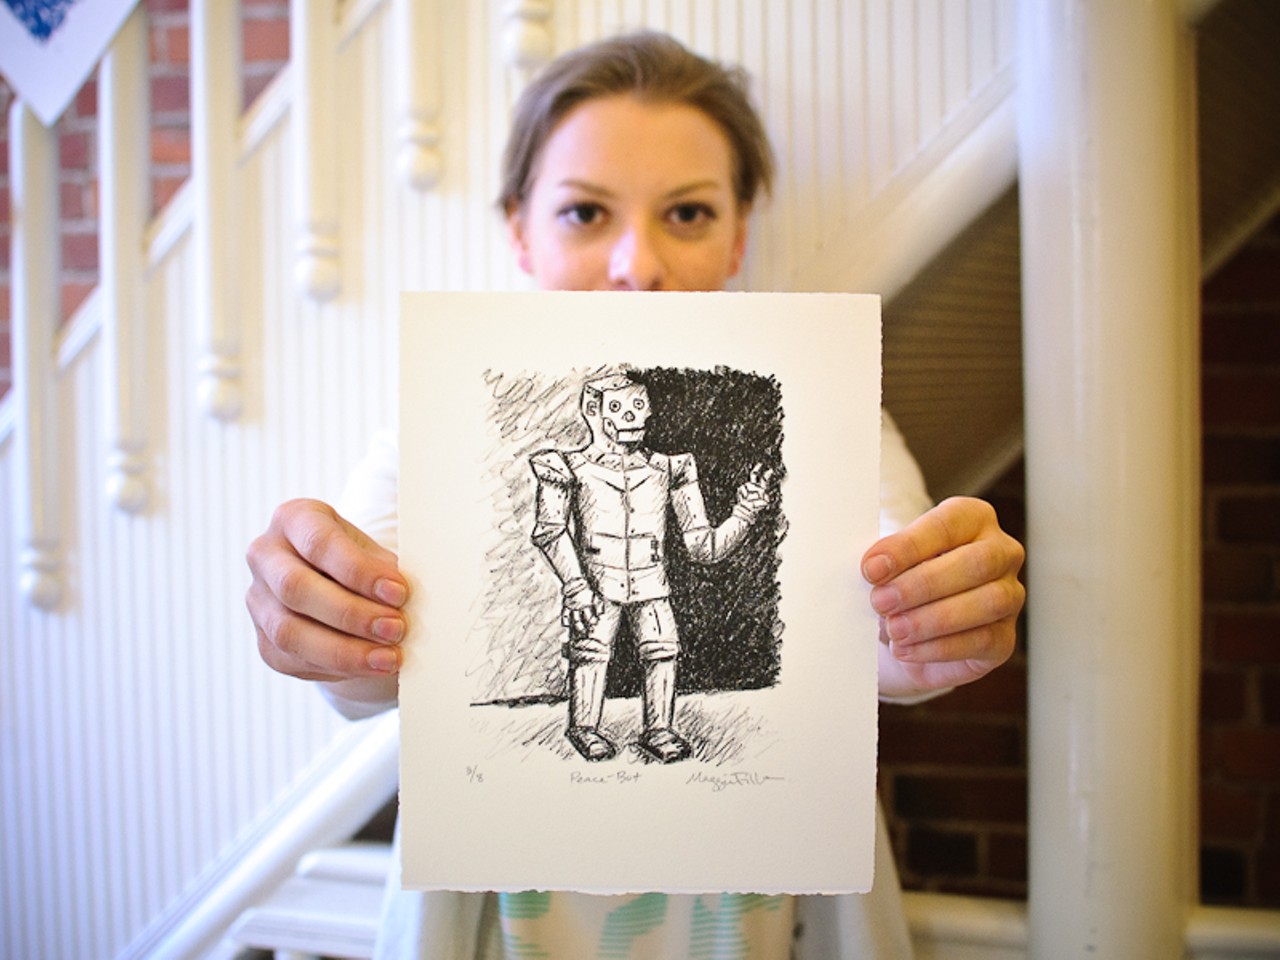 How often are robots depicted as peace-loving hippies? In Maggie Filla&rsquo;s &ldquo;Peace-Bot&rdquo; lithograph, often. Maggie is an intern at the Firecracker Press.